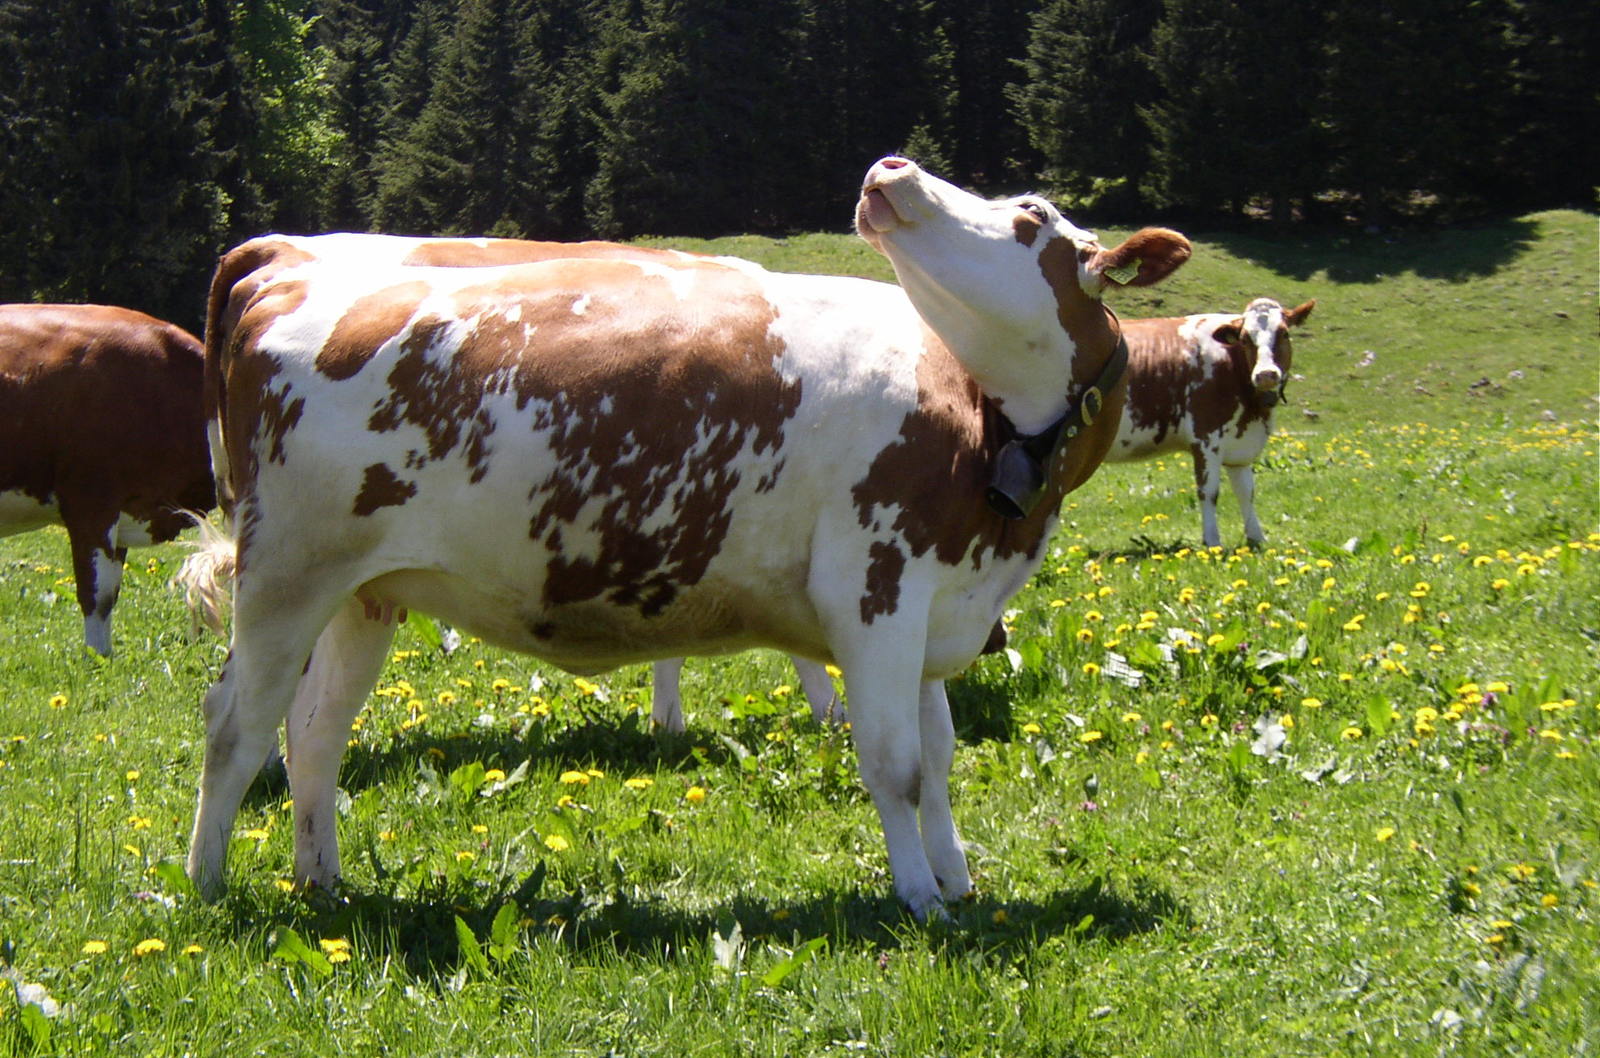 two cows in a field with one standing and the other laying down